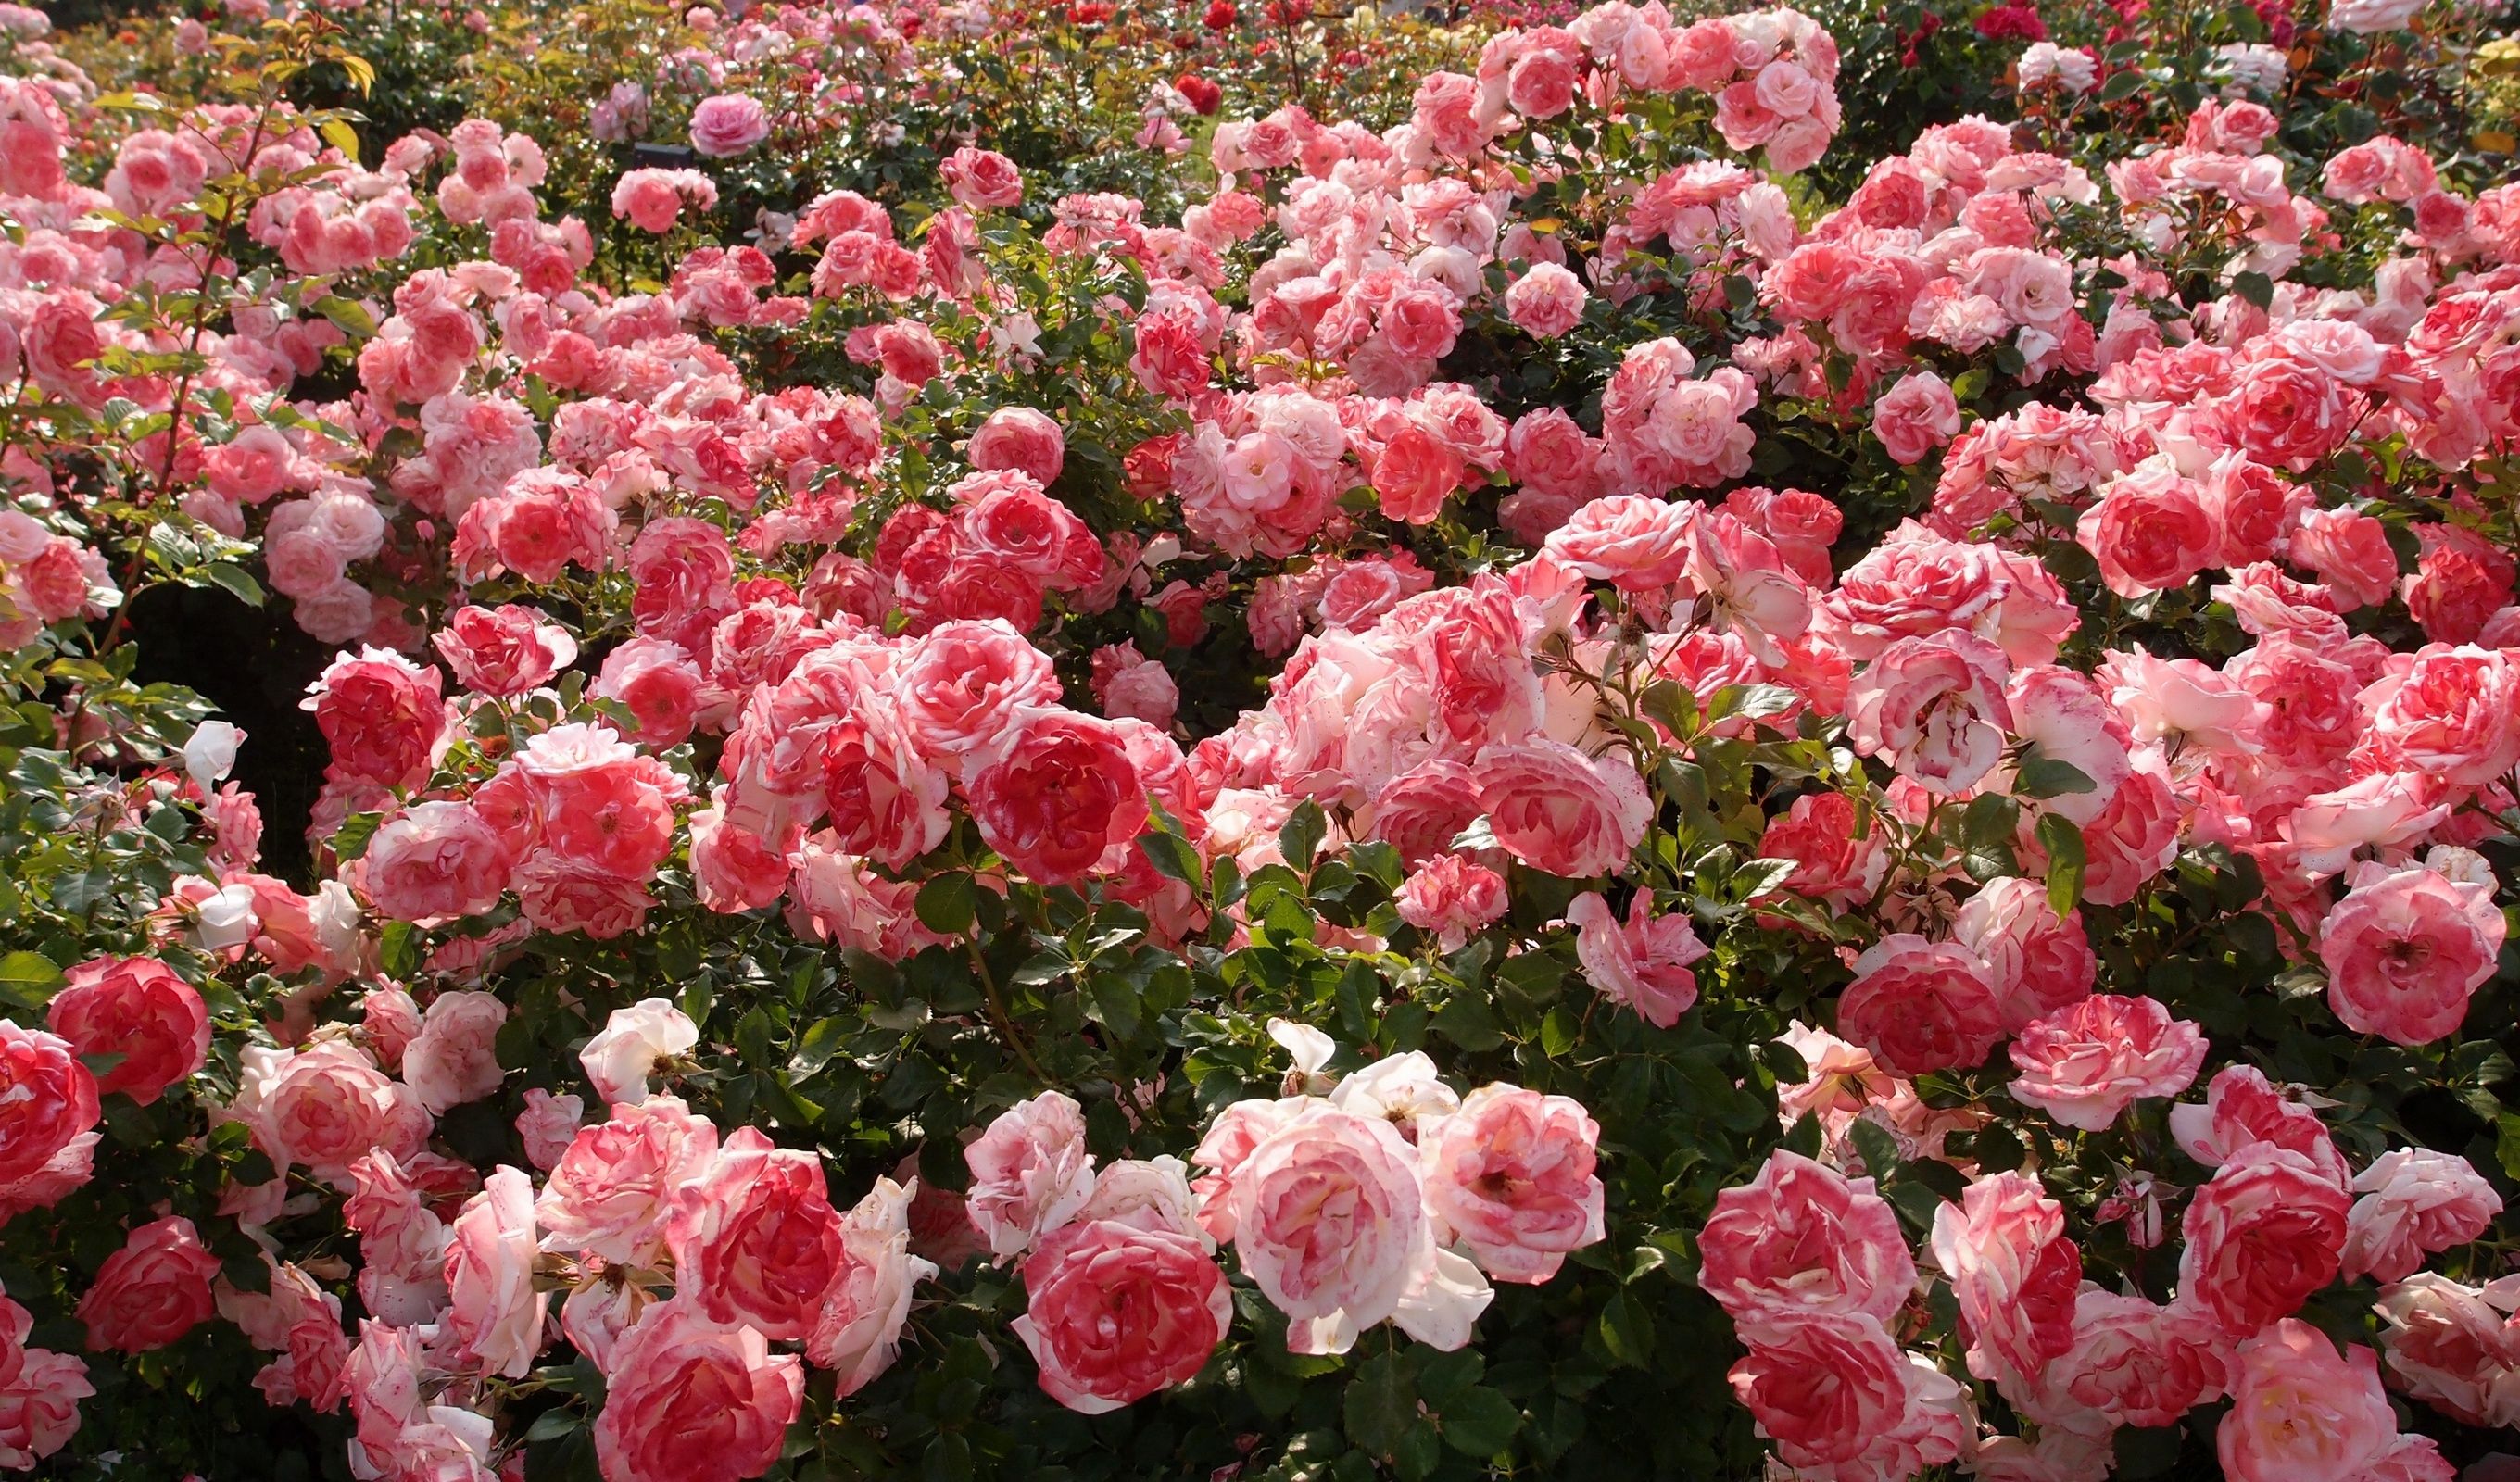 Field of Roses Wallpapers.